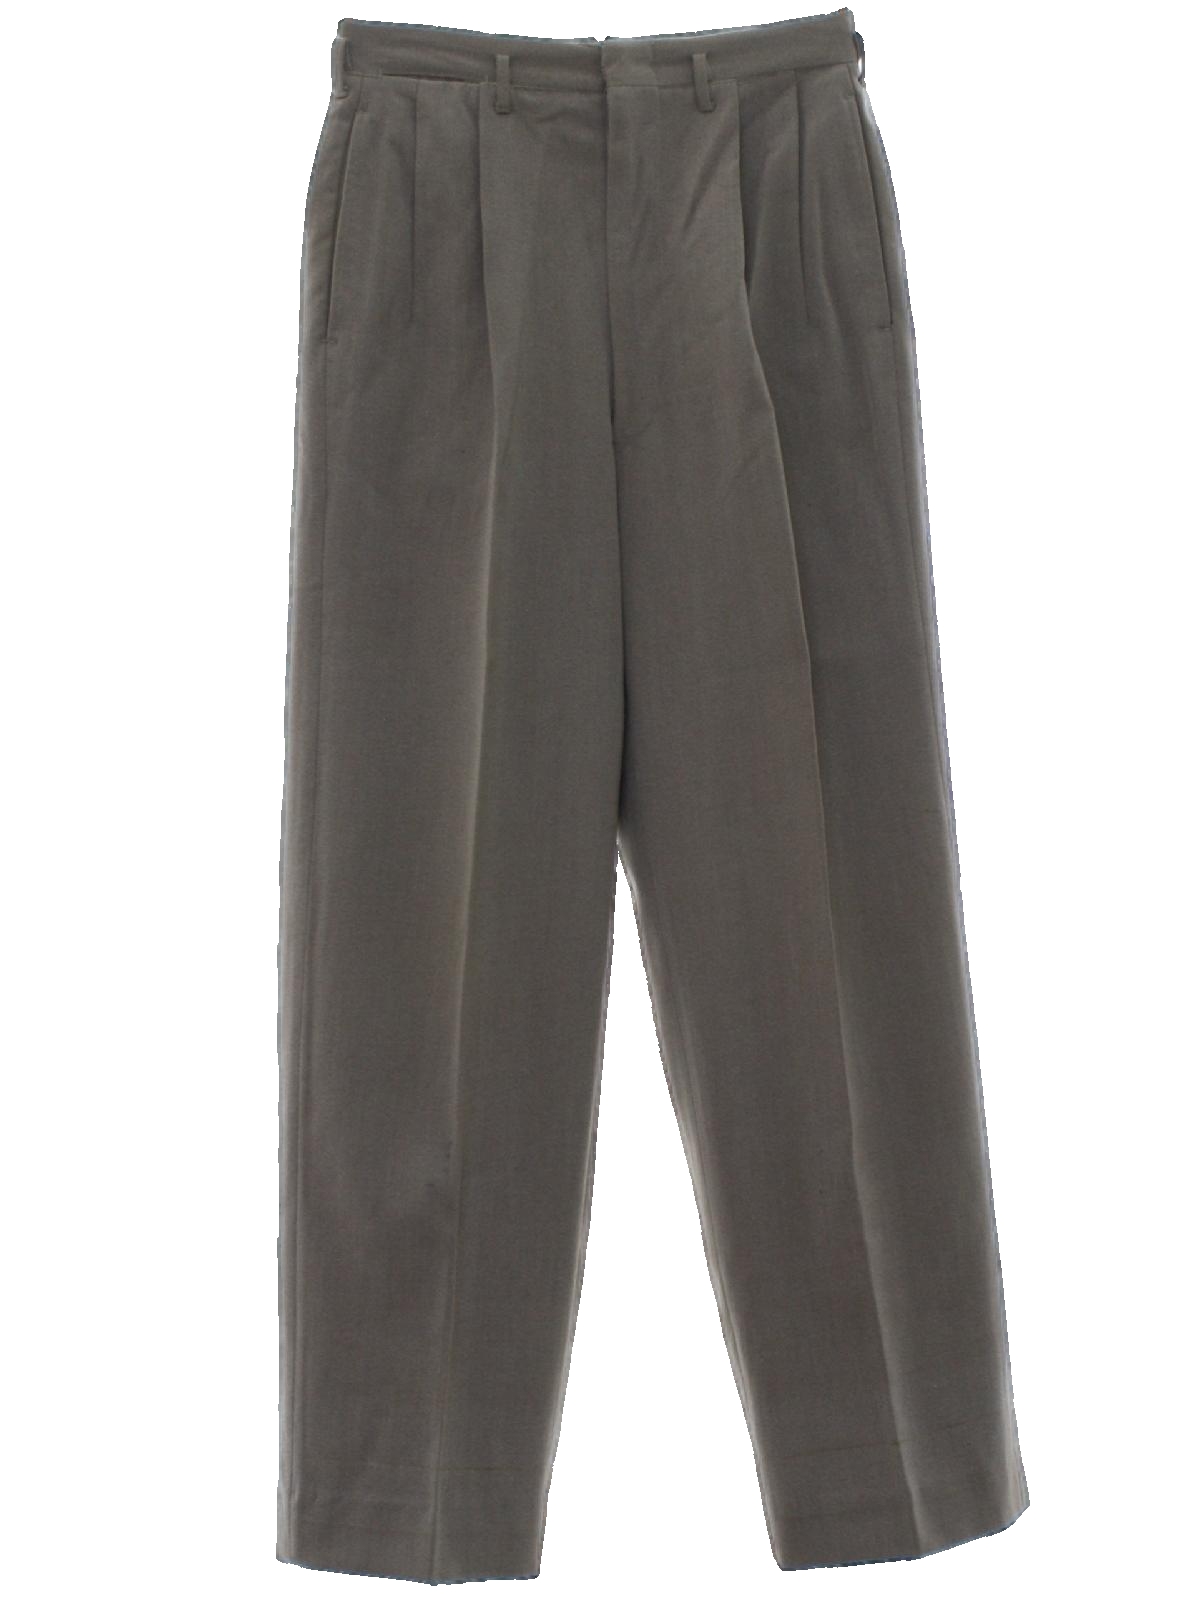 1950's Pants: Early 50s -No Label- Mens grey wool twill pleated pants ...